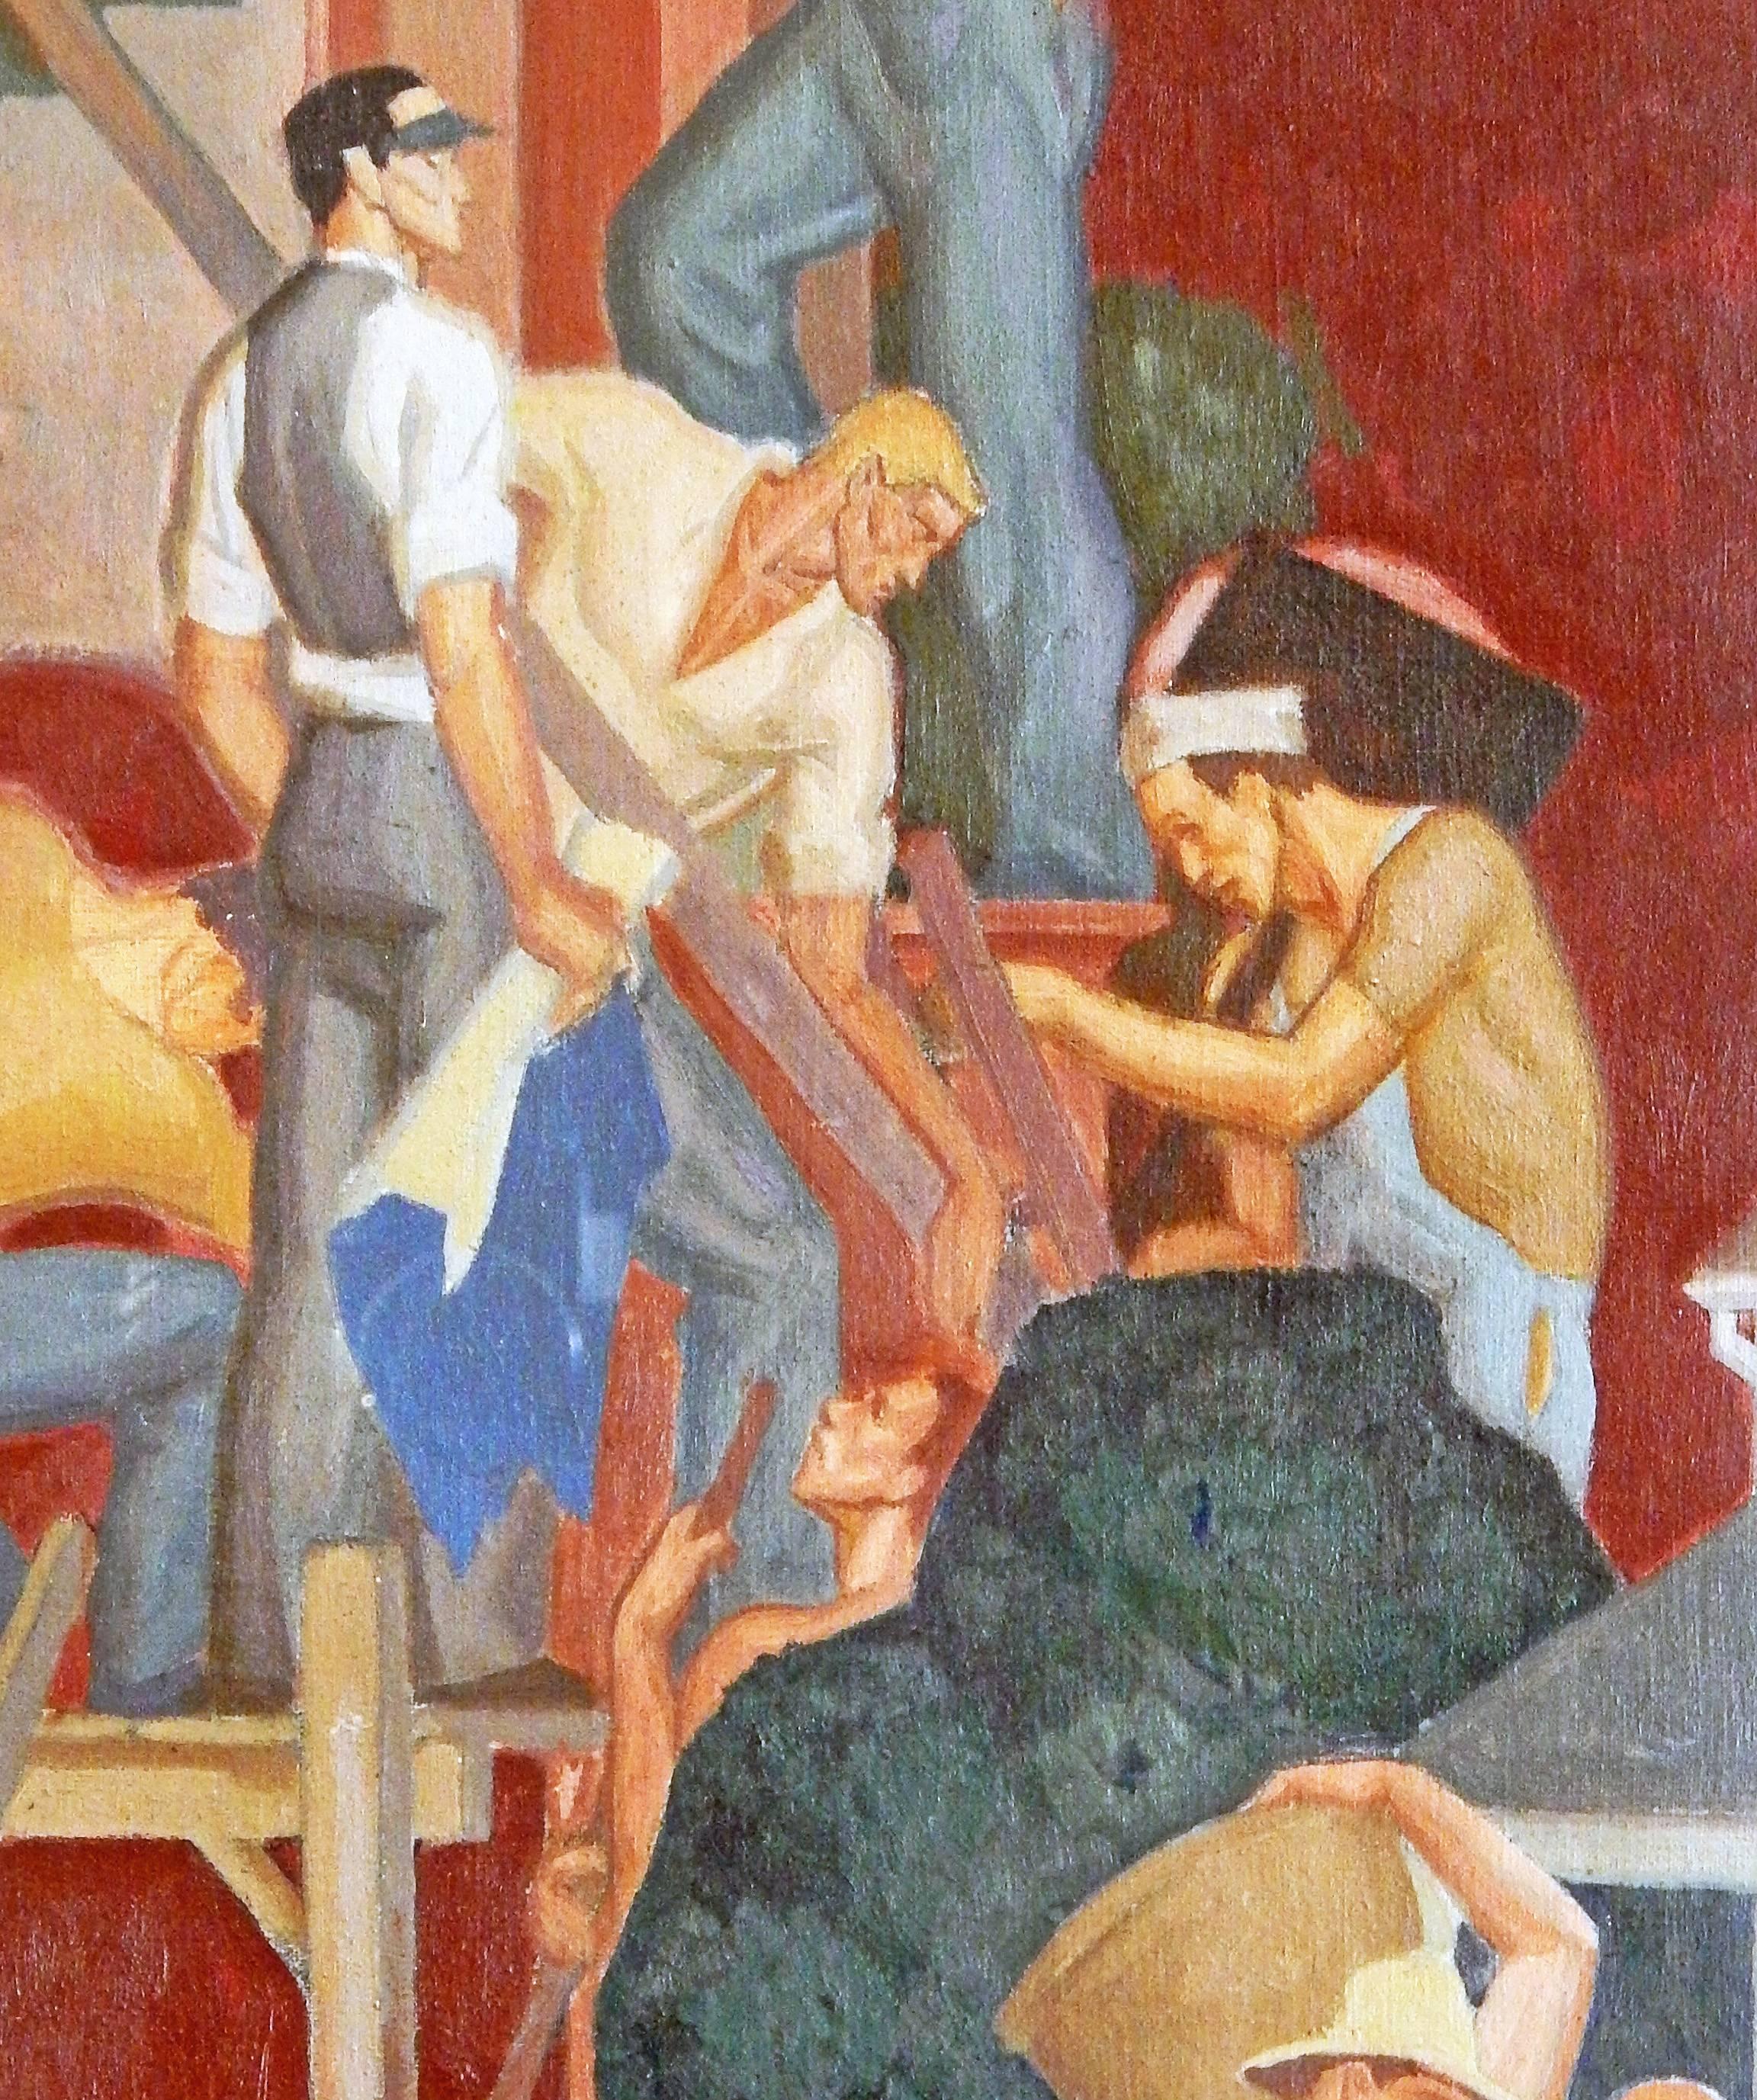 This important and very rare mural study, executed in oil on canvas, was painted by Dunbar Beck in the 1930s, evidently for a project that was never completed. The painting depicts in classic WPA manner a pyramid of American workers including a